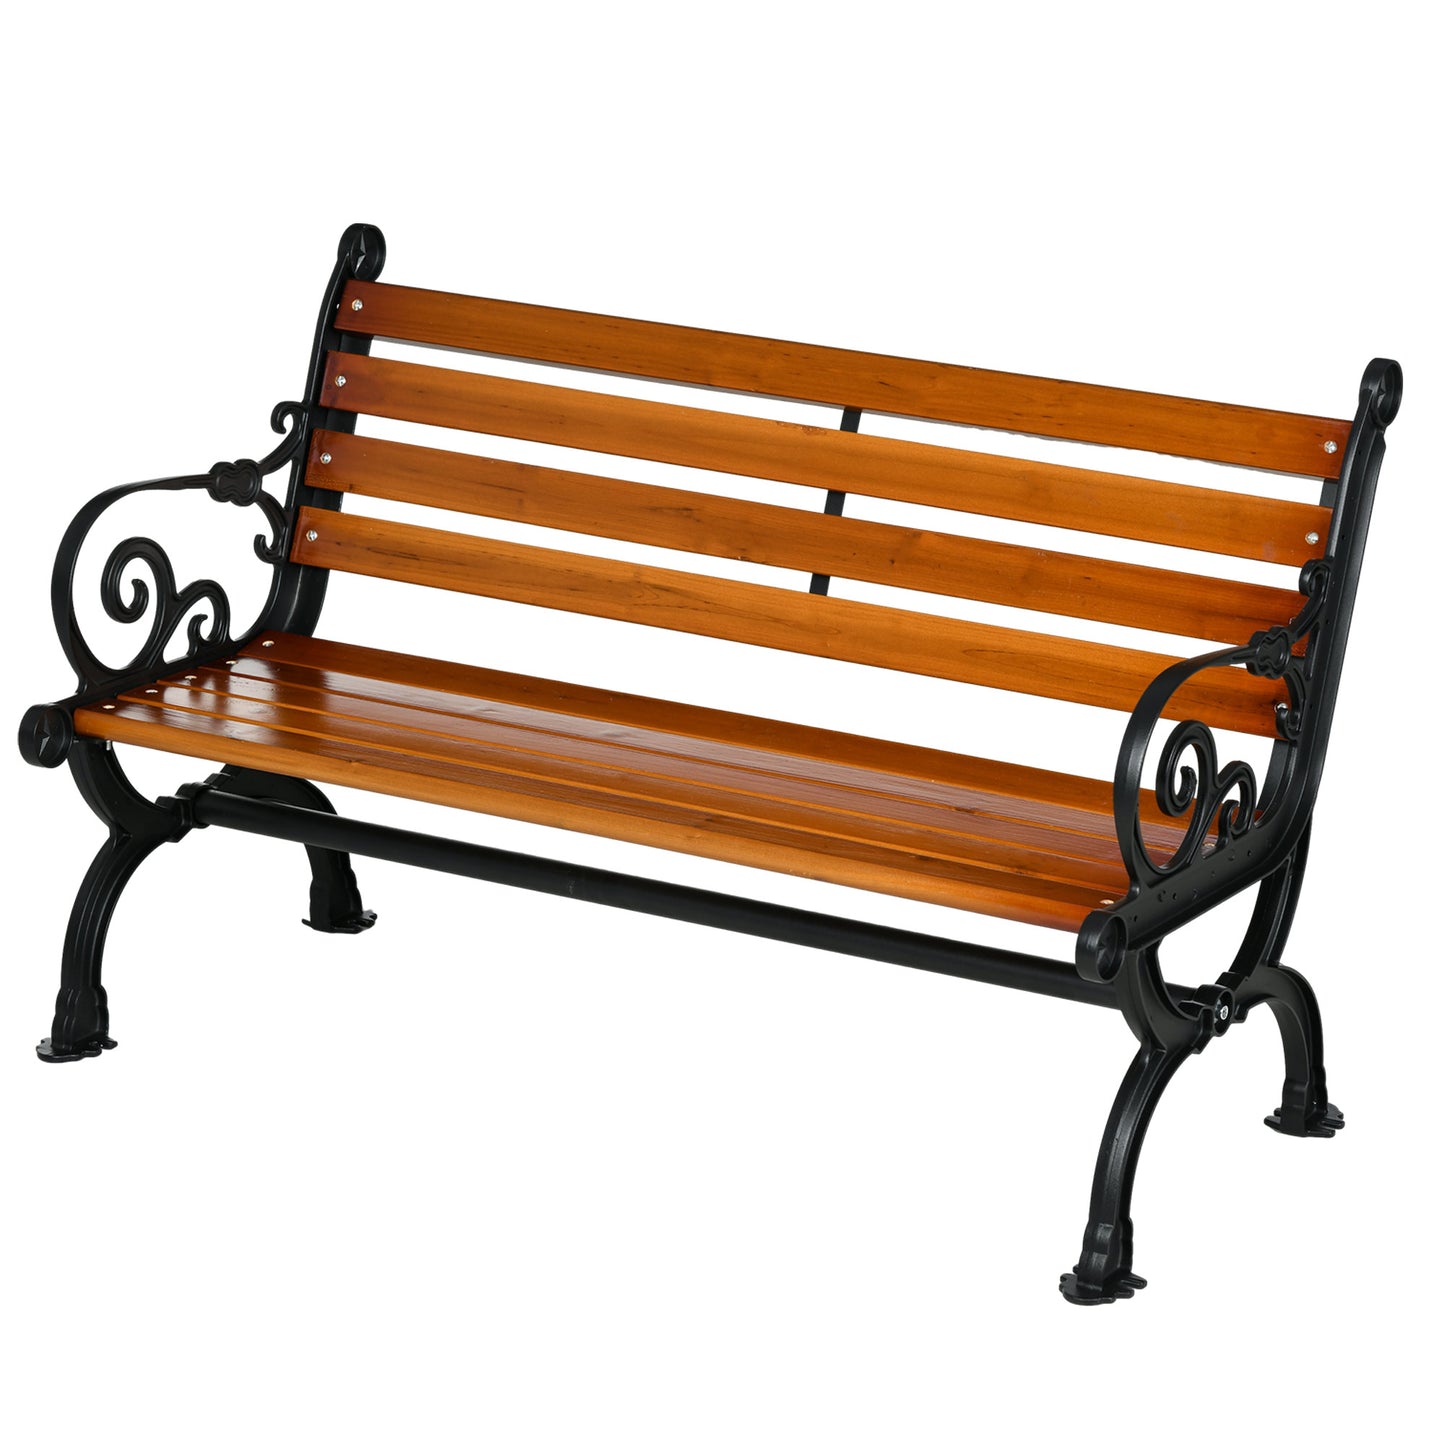 Outsunny garden bench 2 seats in aluminum and wooden wood with armrests, 120x64x79cm, Teak